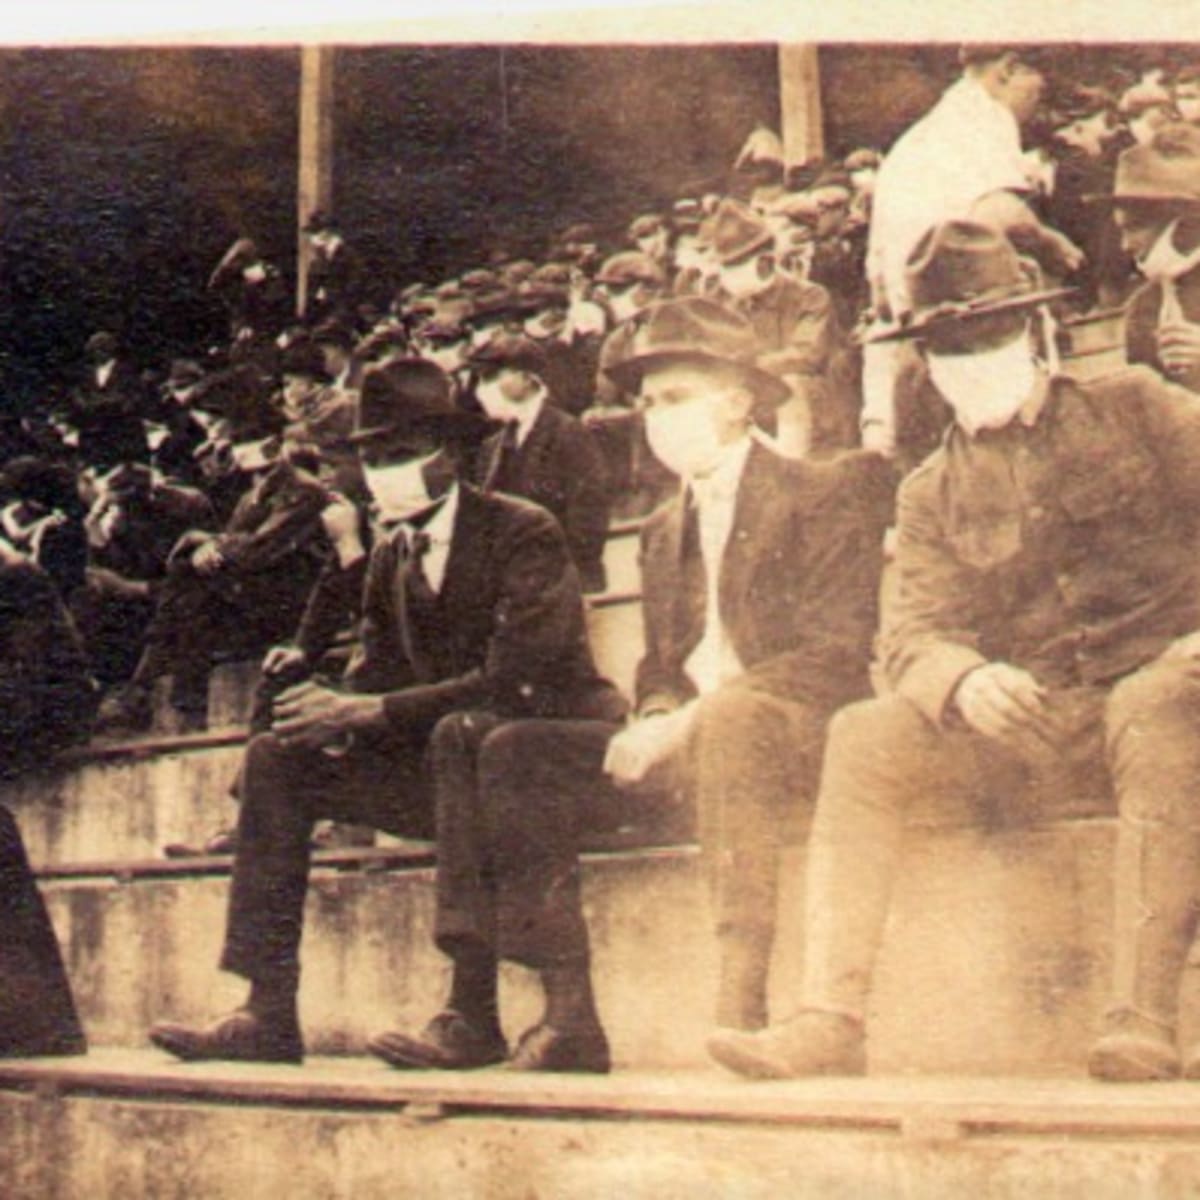 The Pandemic And College Football: A Look Back At The 1918 Season ...